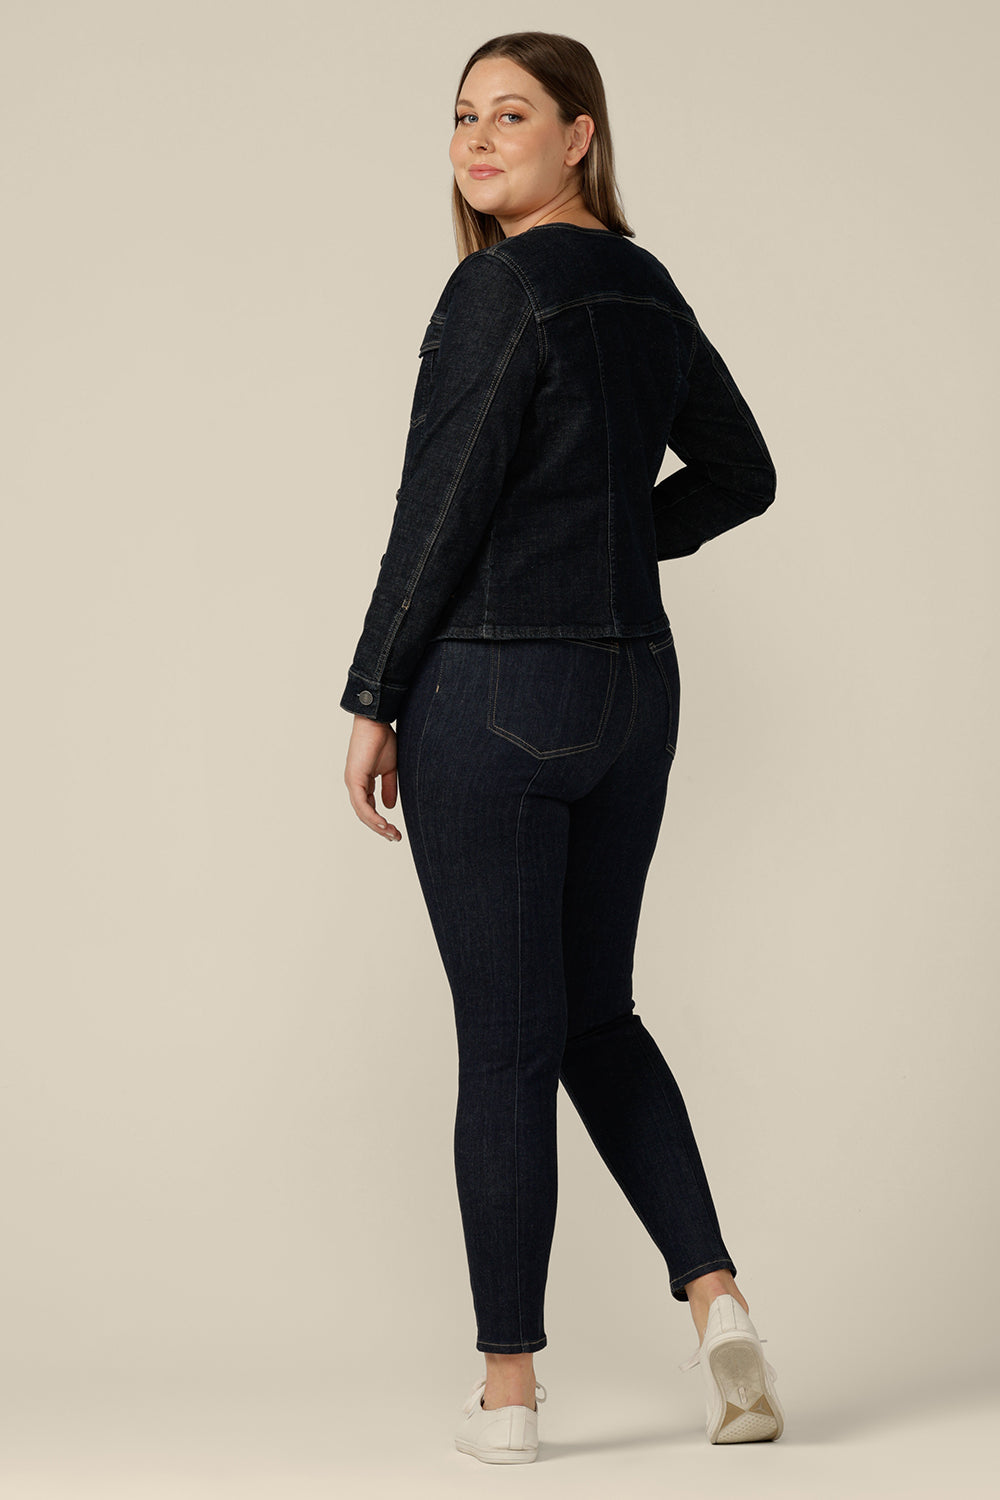 Back view of a collarless denim jacket in size 12 is worn with white bamboo jersey T-shirt and super-stretch skinny jeans. Consciously made in partnership with Outland Denim, this denim jacket is tailored to fit women in sizes 8 to 24 by Australian and New Zealand women's clothing experts, L&F.